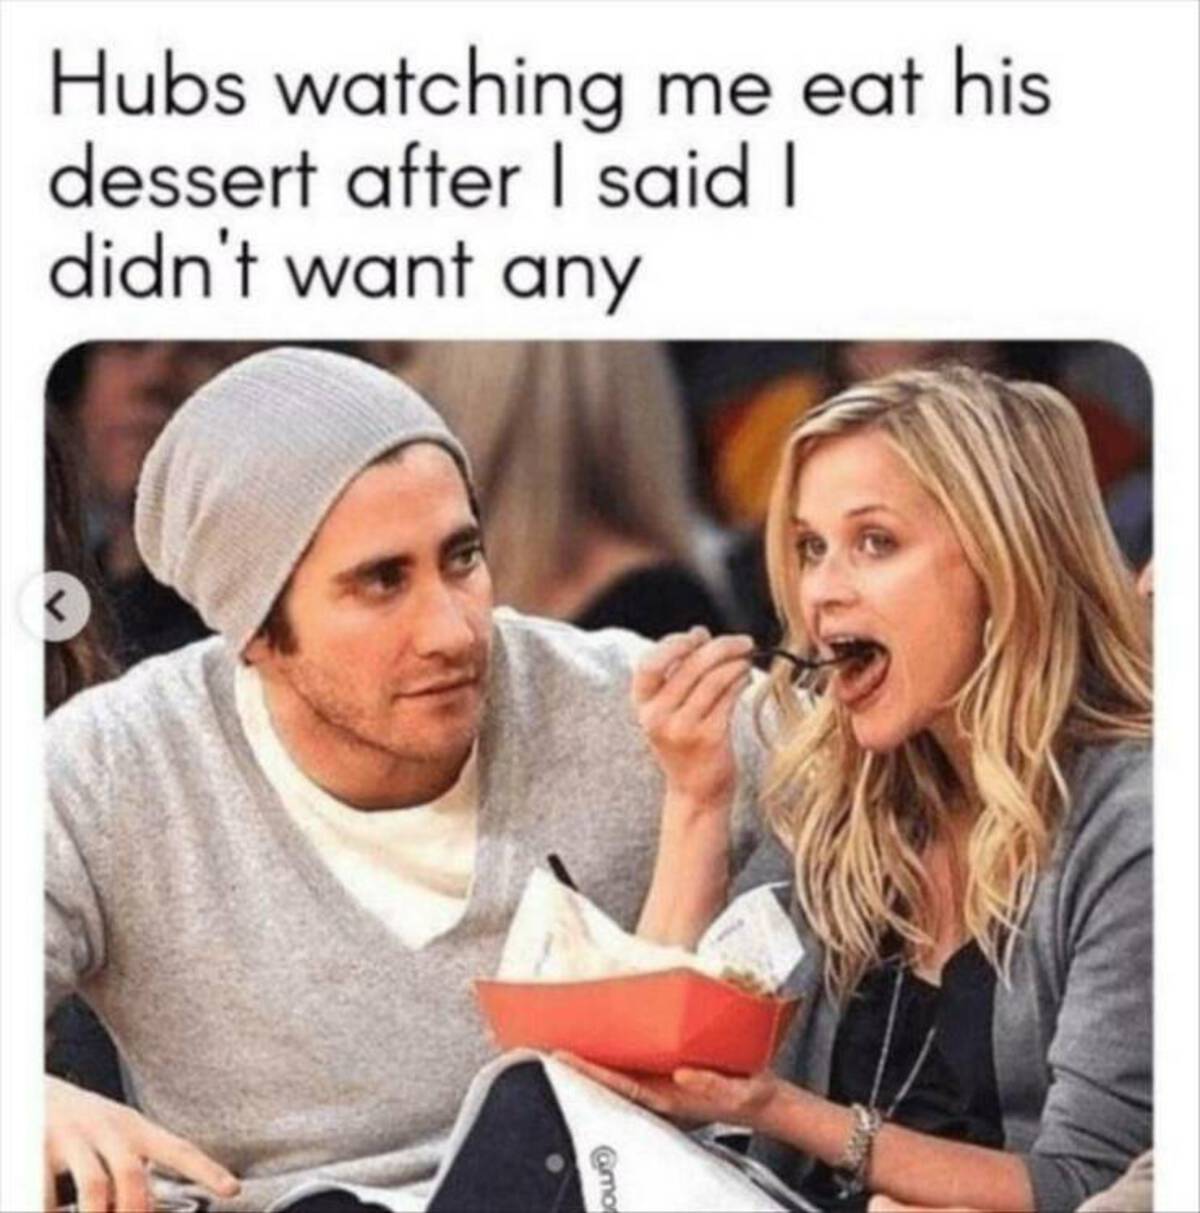 reese and jake gyllenhaal - Hubs watching me eat his dessert after I said I didn't want any